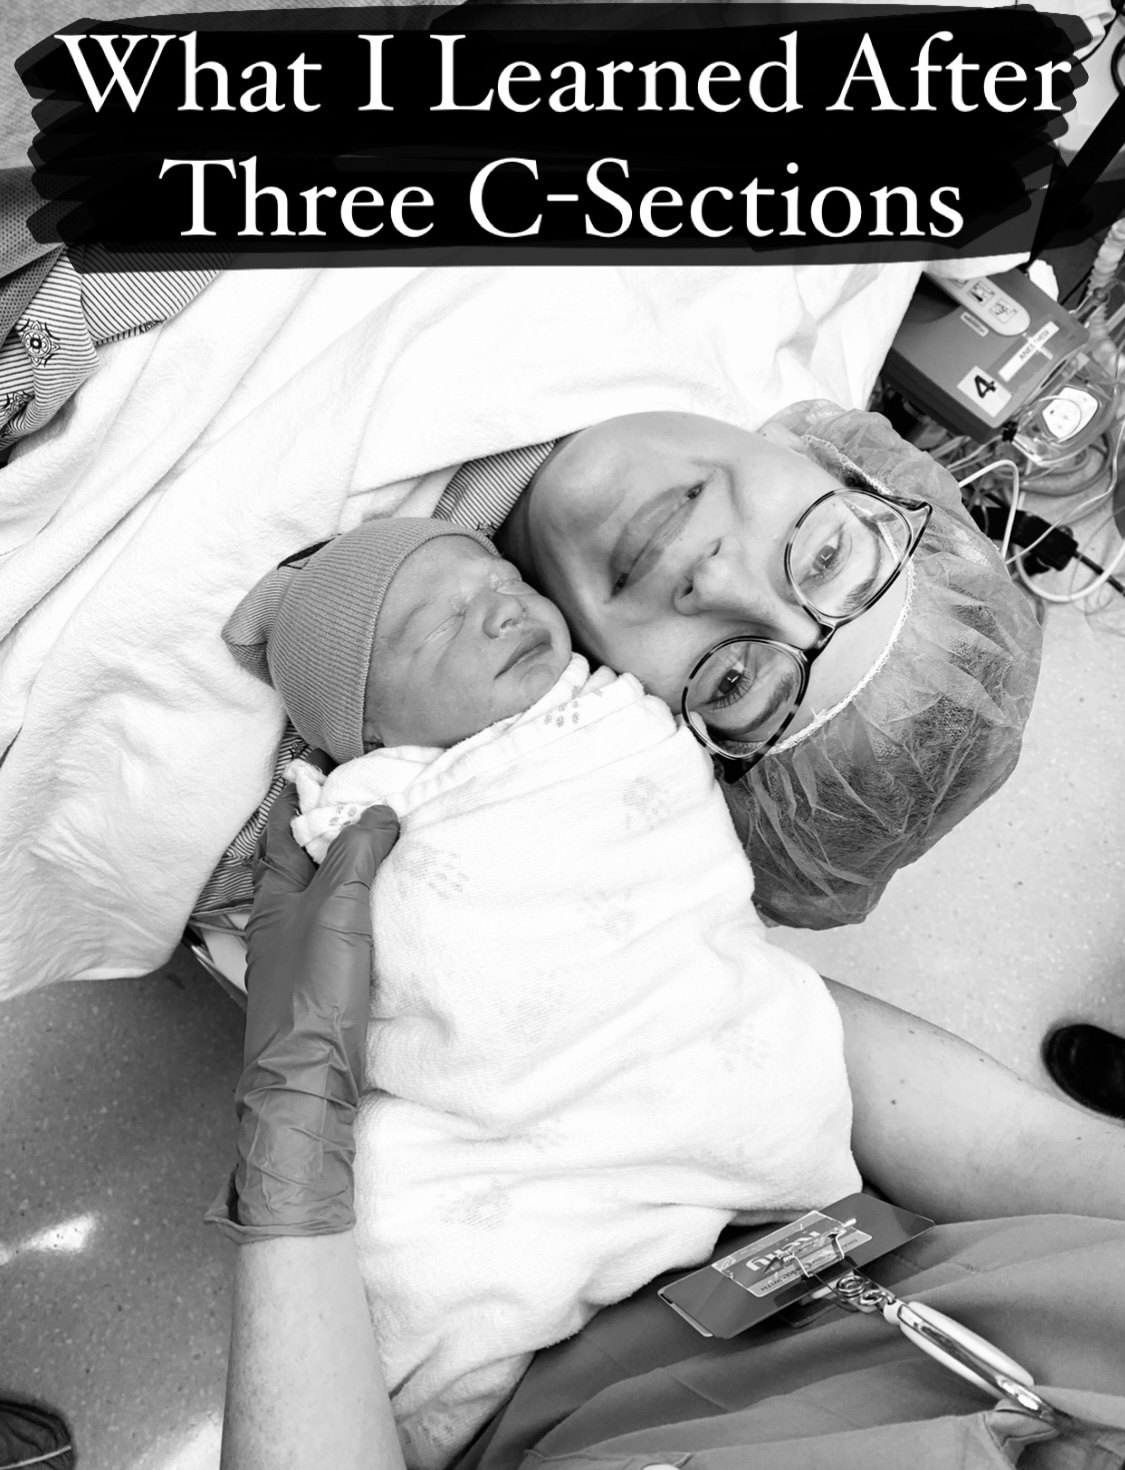 A Week-By-Week Guide to C-Section Recovery - Baby Chick